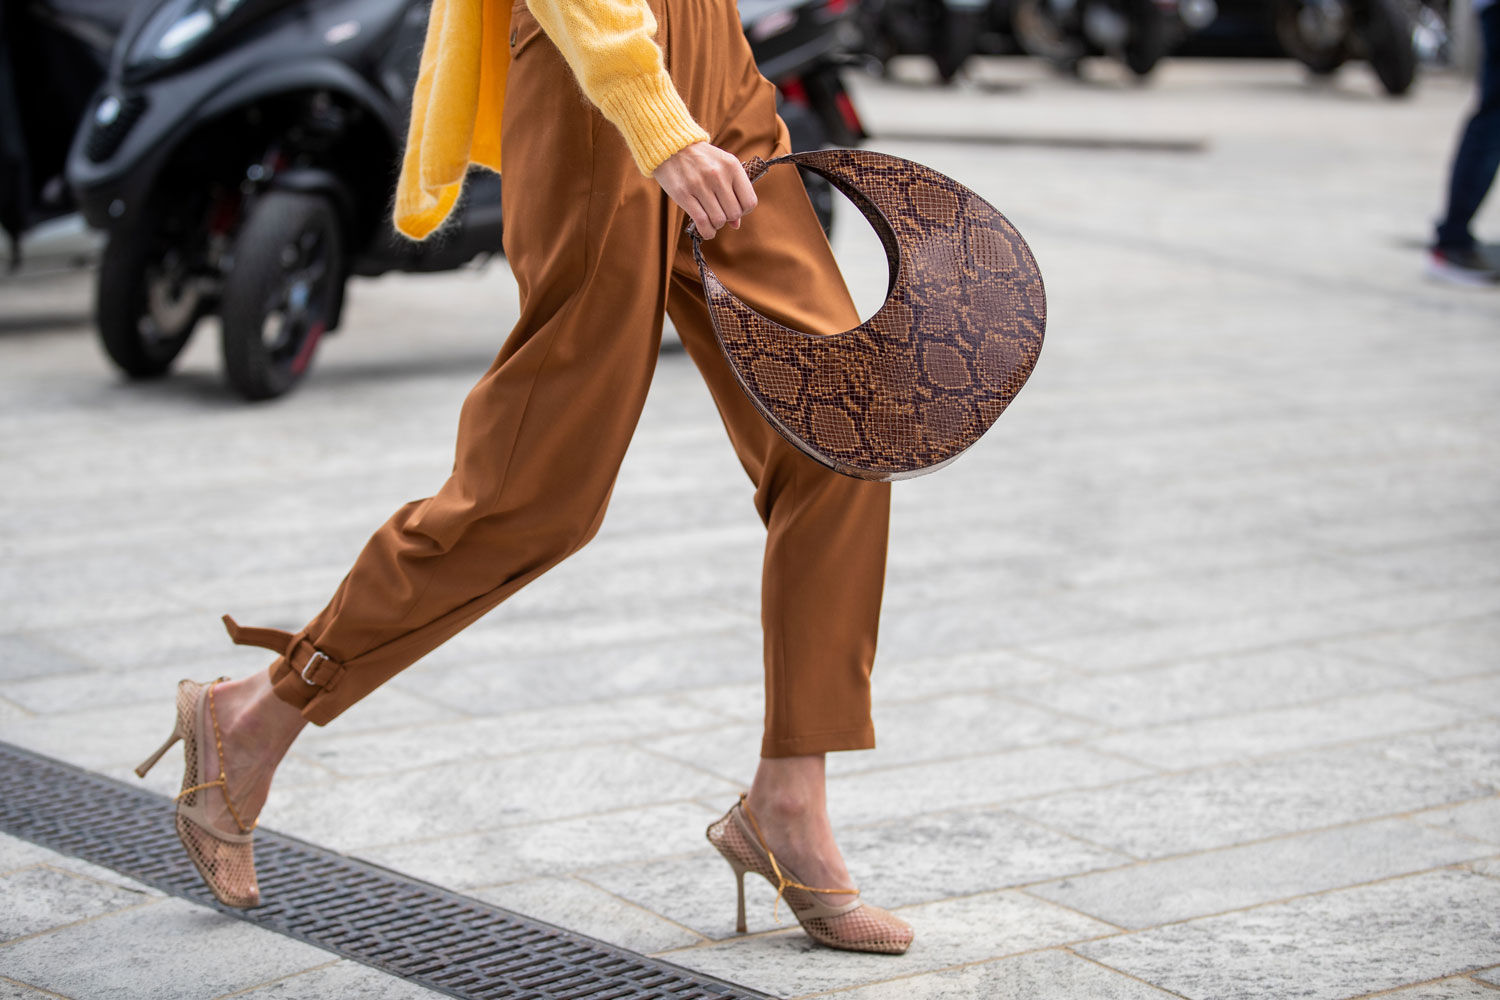 7 of the most sophisticated moon bags to flaunt this season